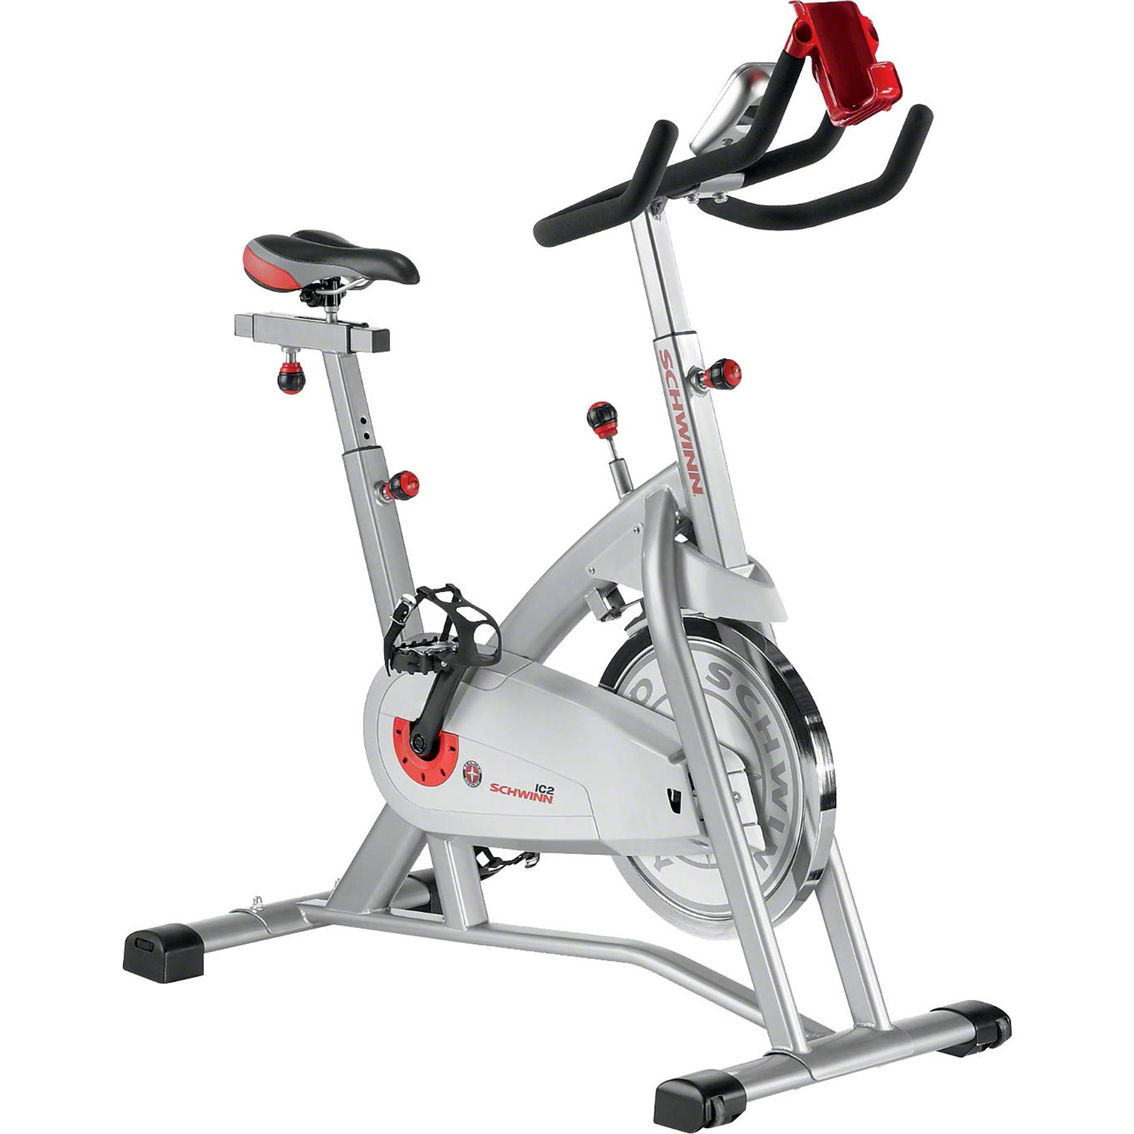 30 Minute Workouts In A Binder For Indoor Cycling for Burn Fat fast